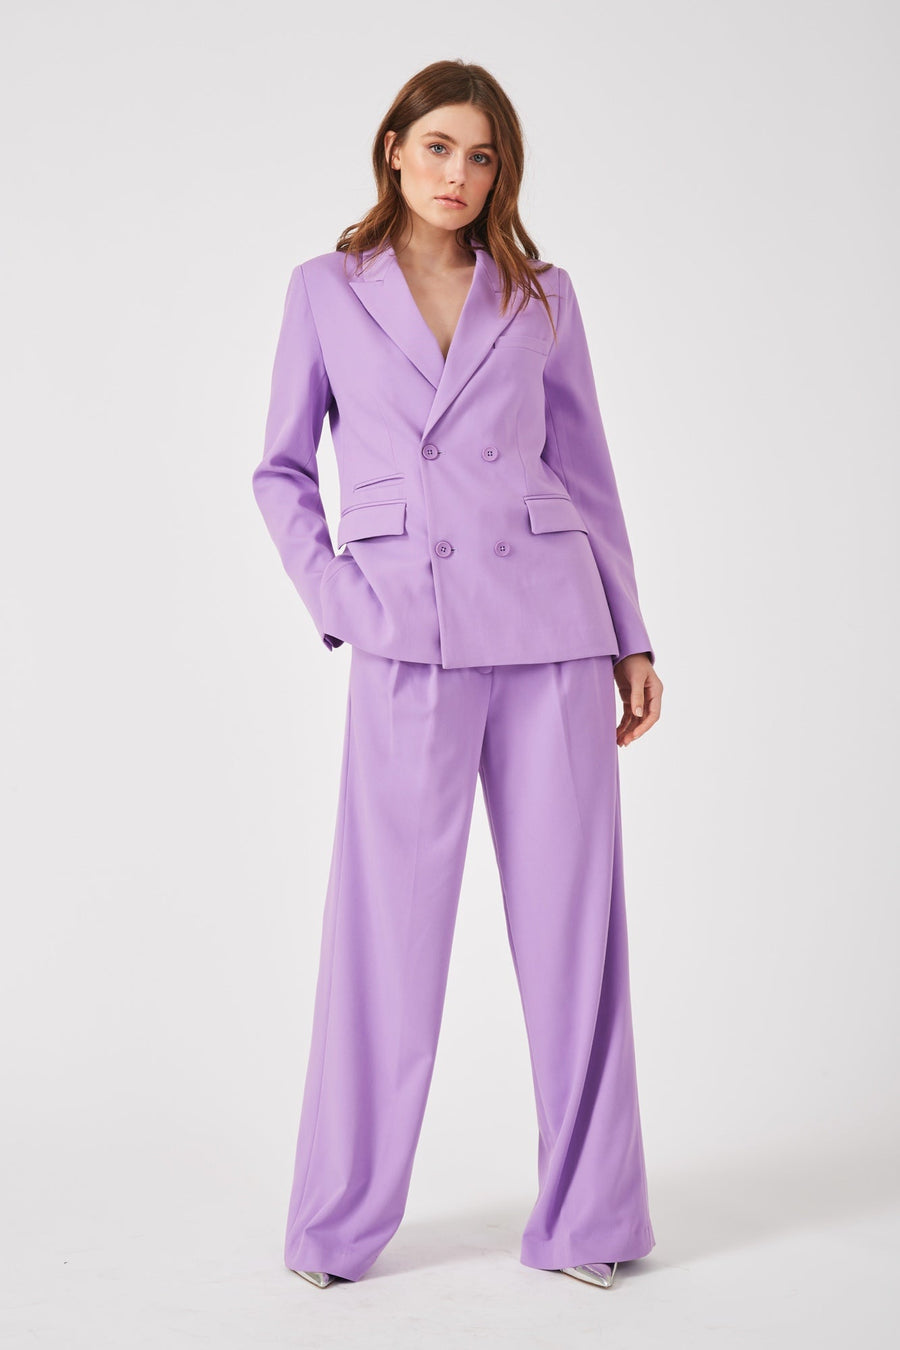 THE MULBERRY DOUBLE BREASTED BLAZER RADIANT - ORCHID